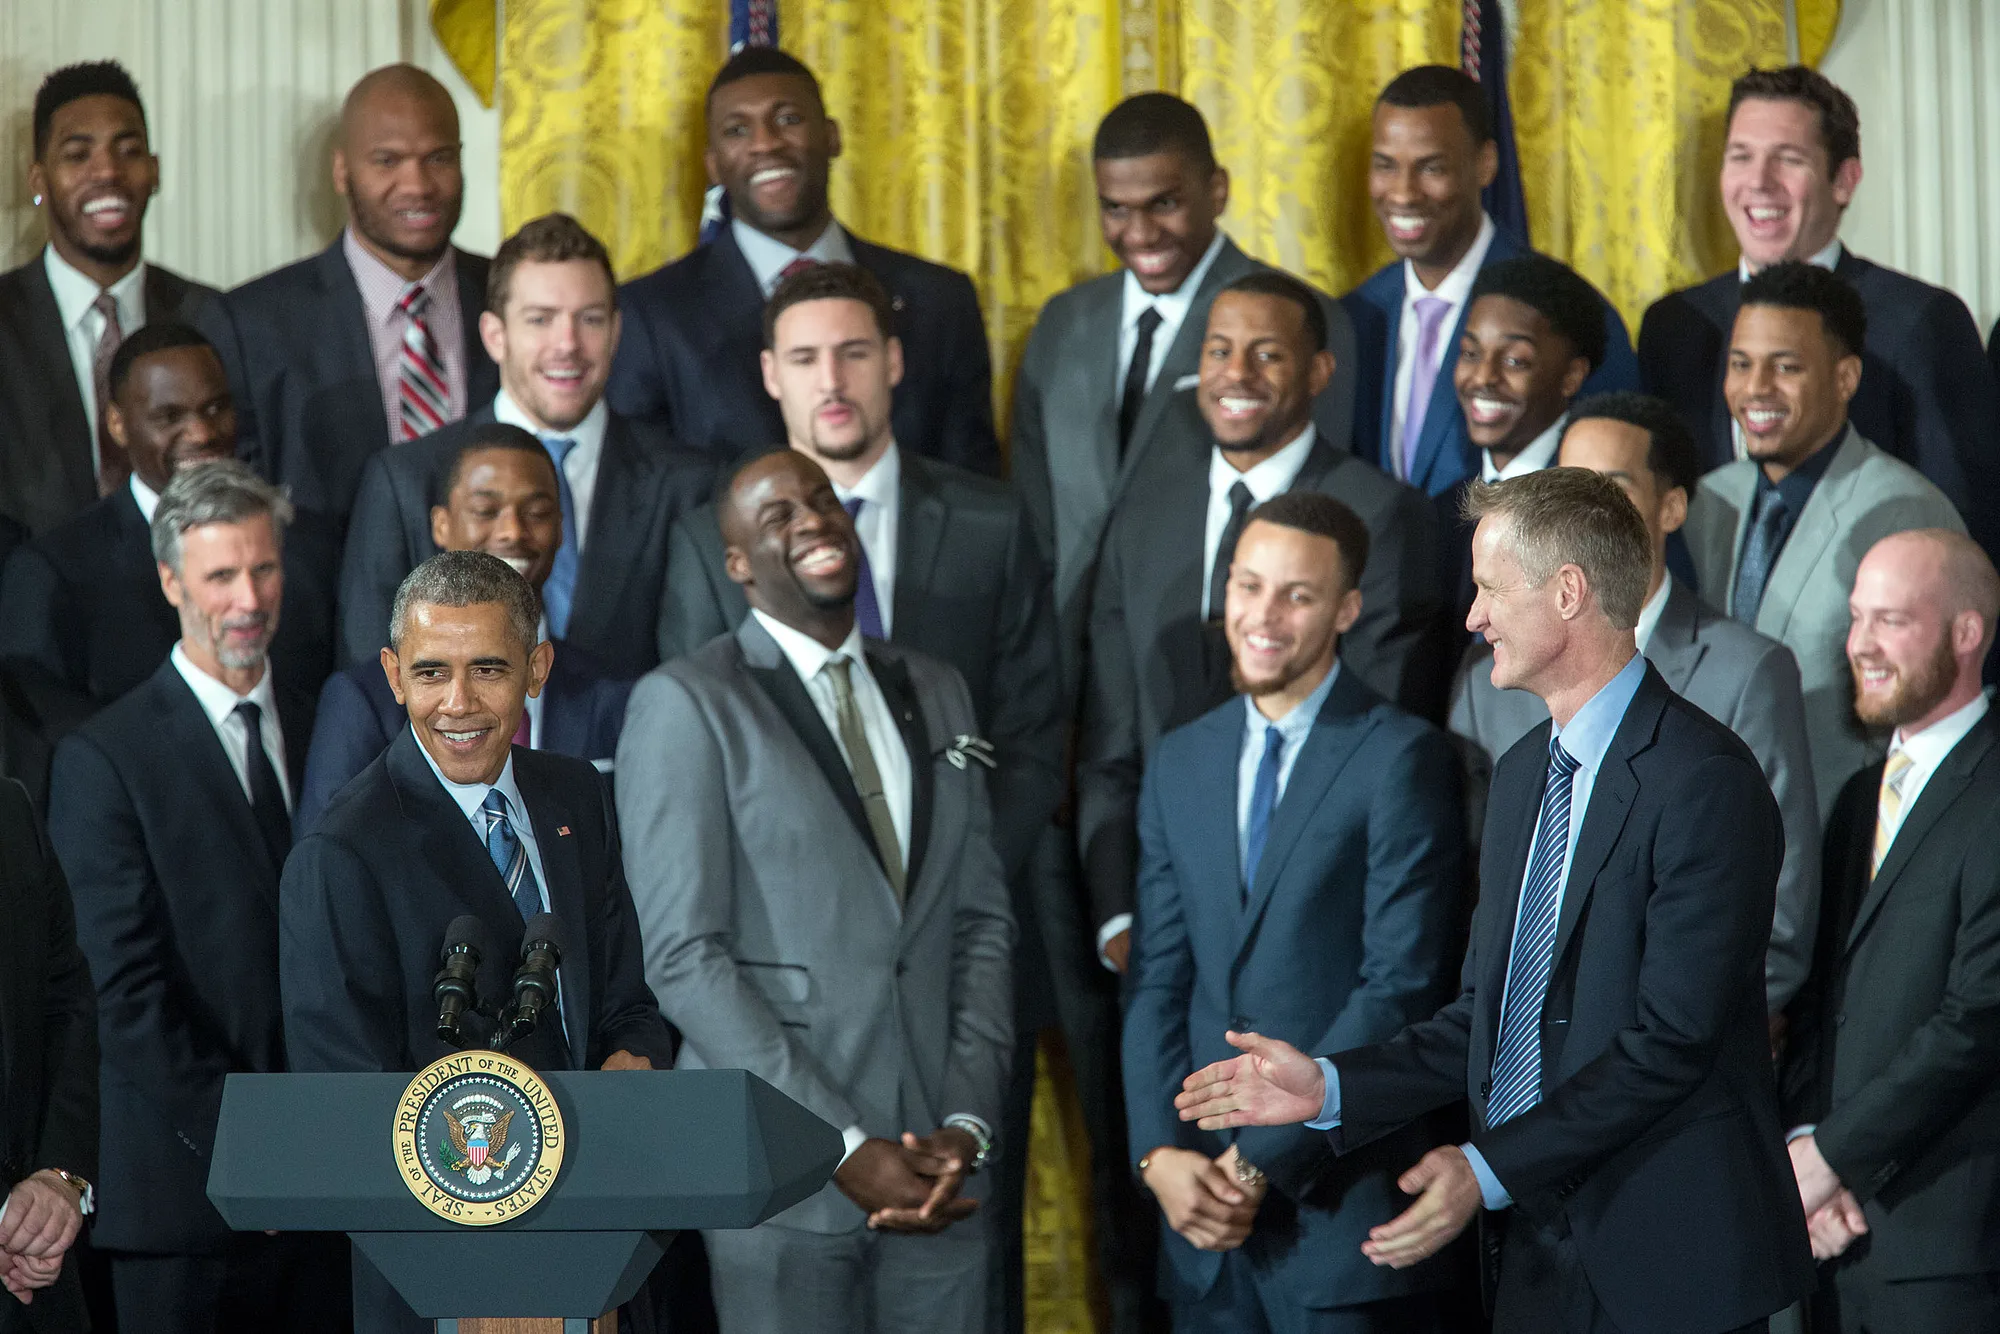 Honoring the NBA Champion Golden State Warriors